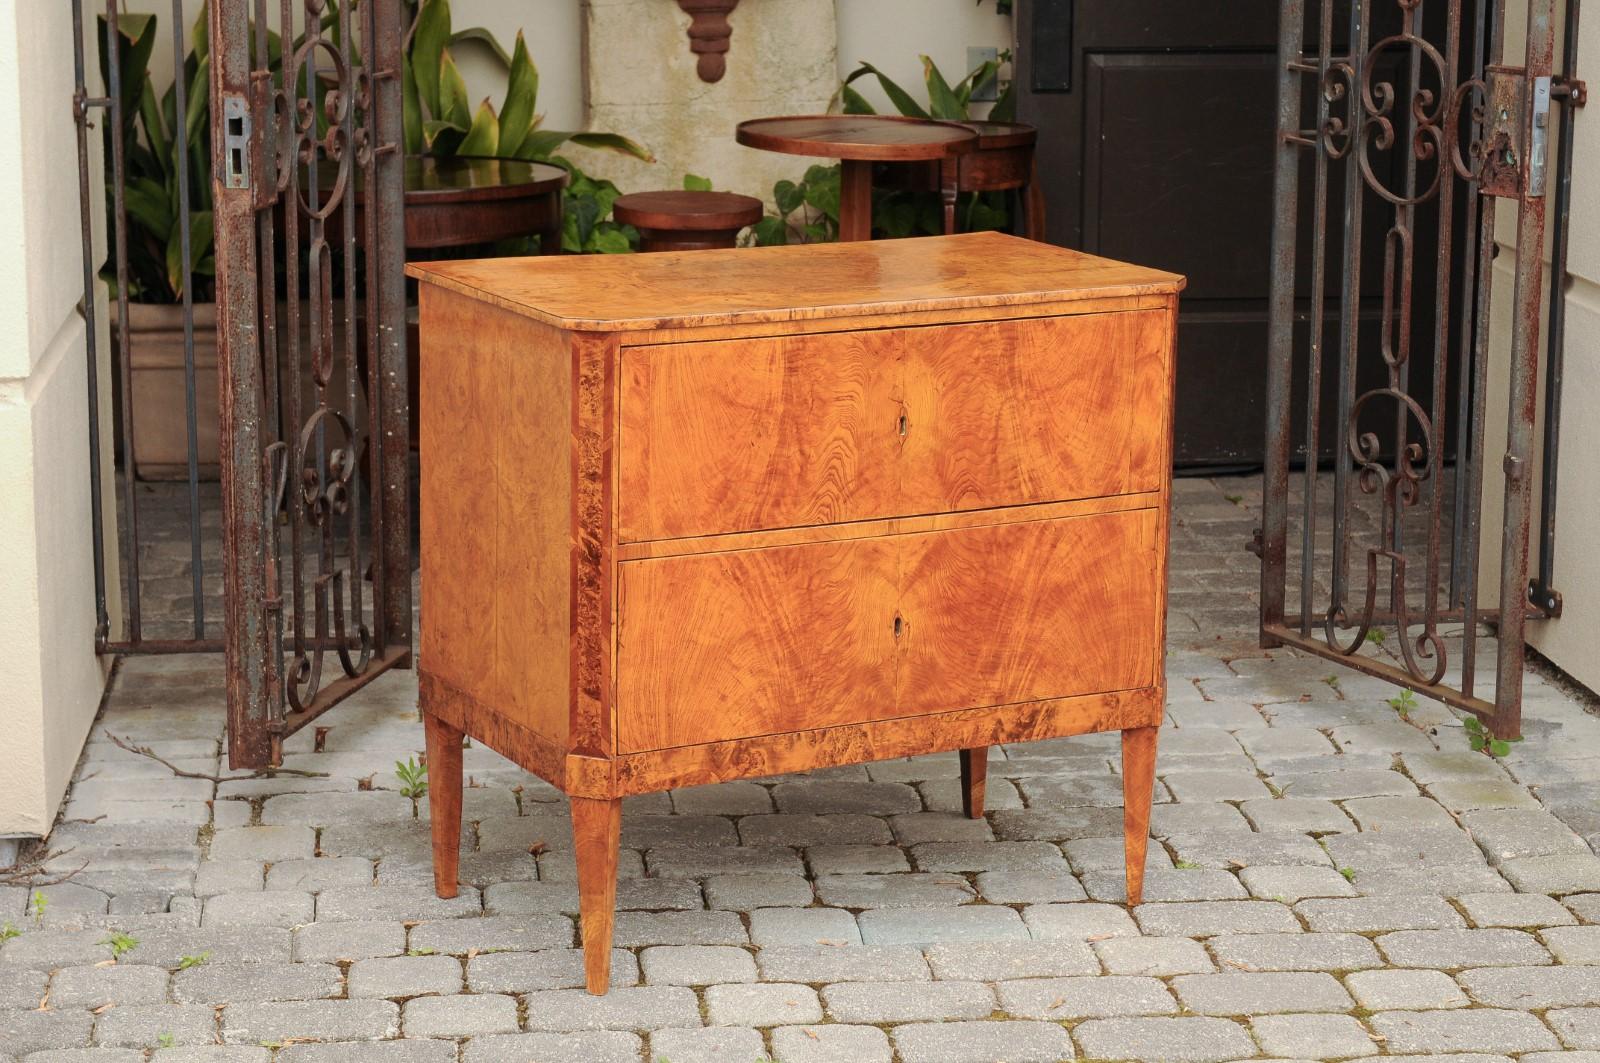 An Austrian Biedermeier period burled walnut veneered commode from the early 19th century, with bookmarked design, tapered legs and inlaid accents. Born in Imperial Austria during the first quarter of the 19th century, this exquisite Biedermeier